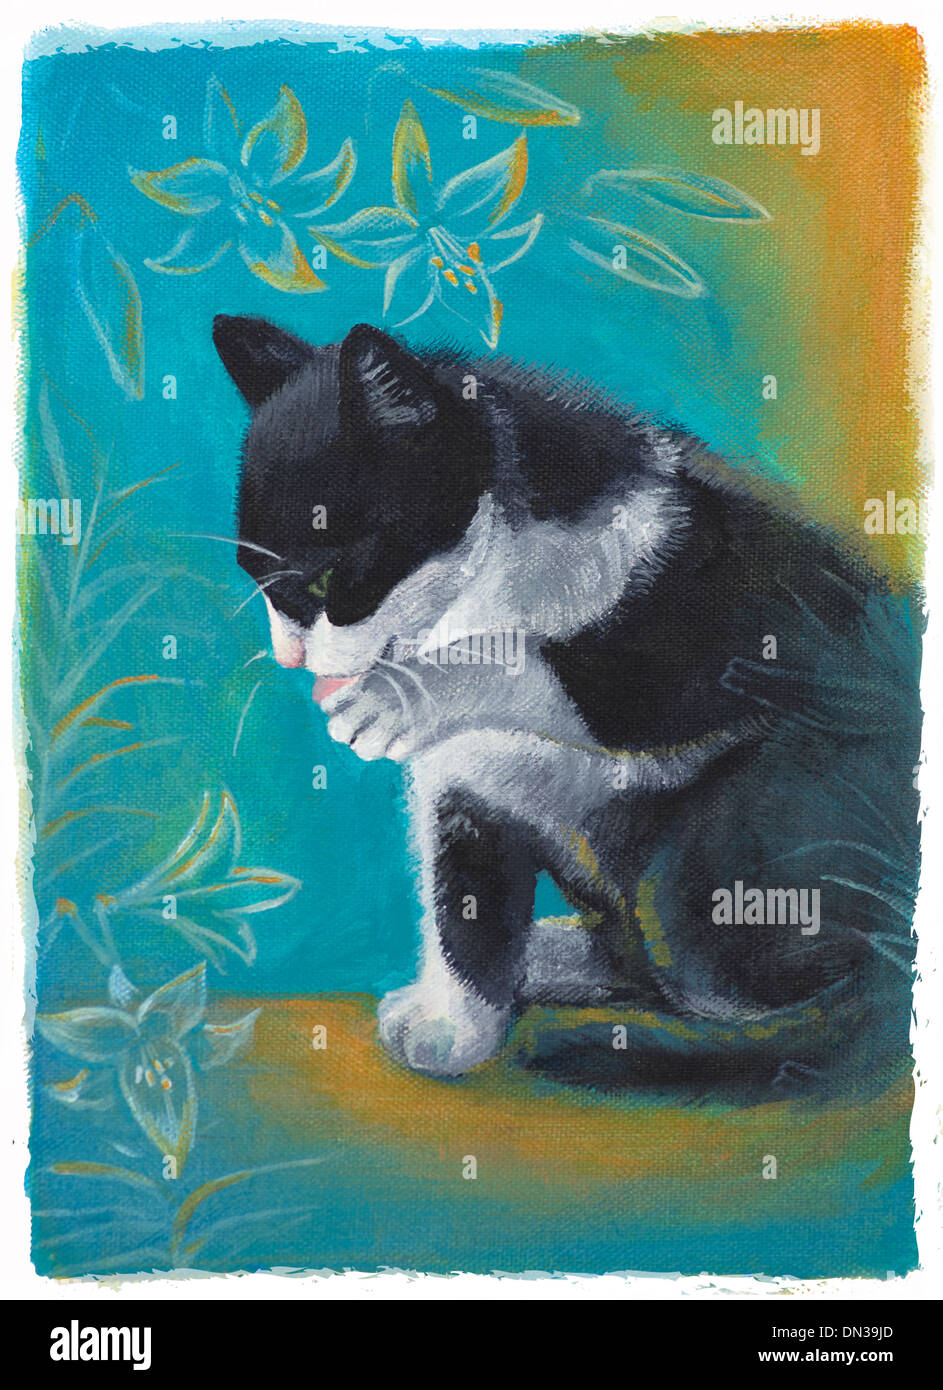 painted european shorthair cat kitten licking its paw black and white fur with lily, part of set cat calendar sign Cancer Stock Photo